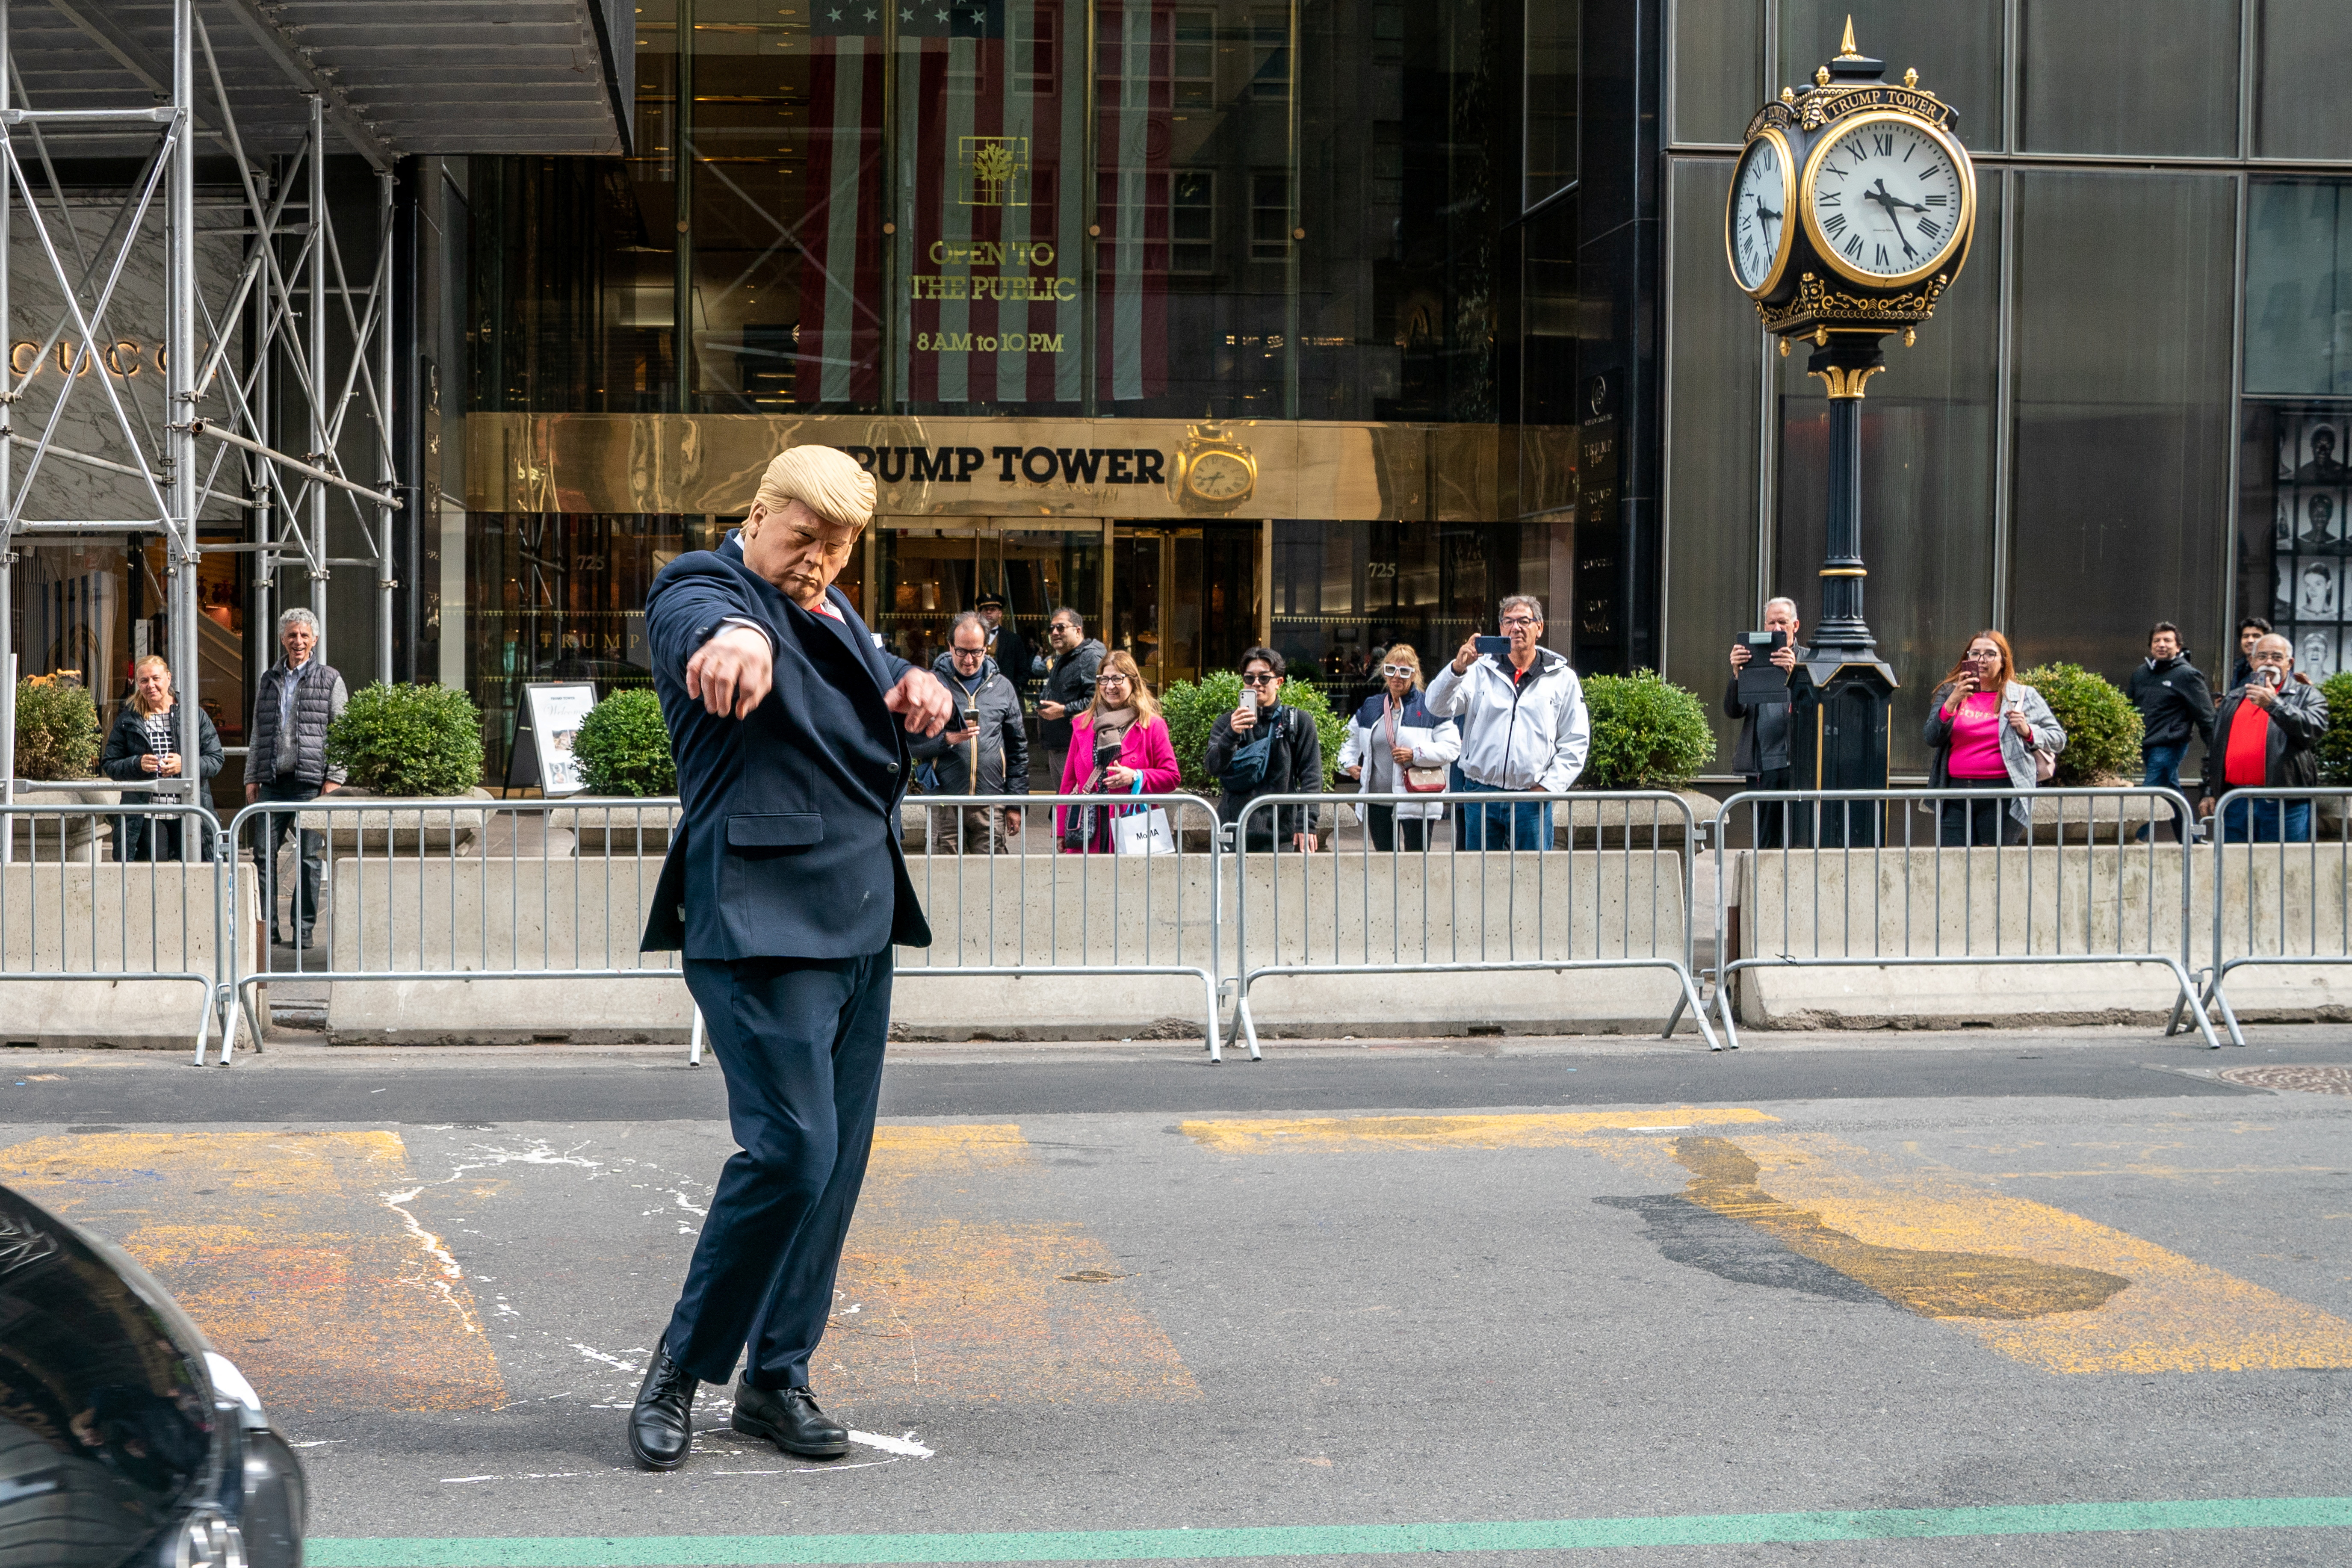 A person wearing a mask depicting former U.S. President Trump directs traffic outside of Trump Tower, in New York